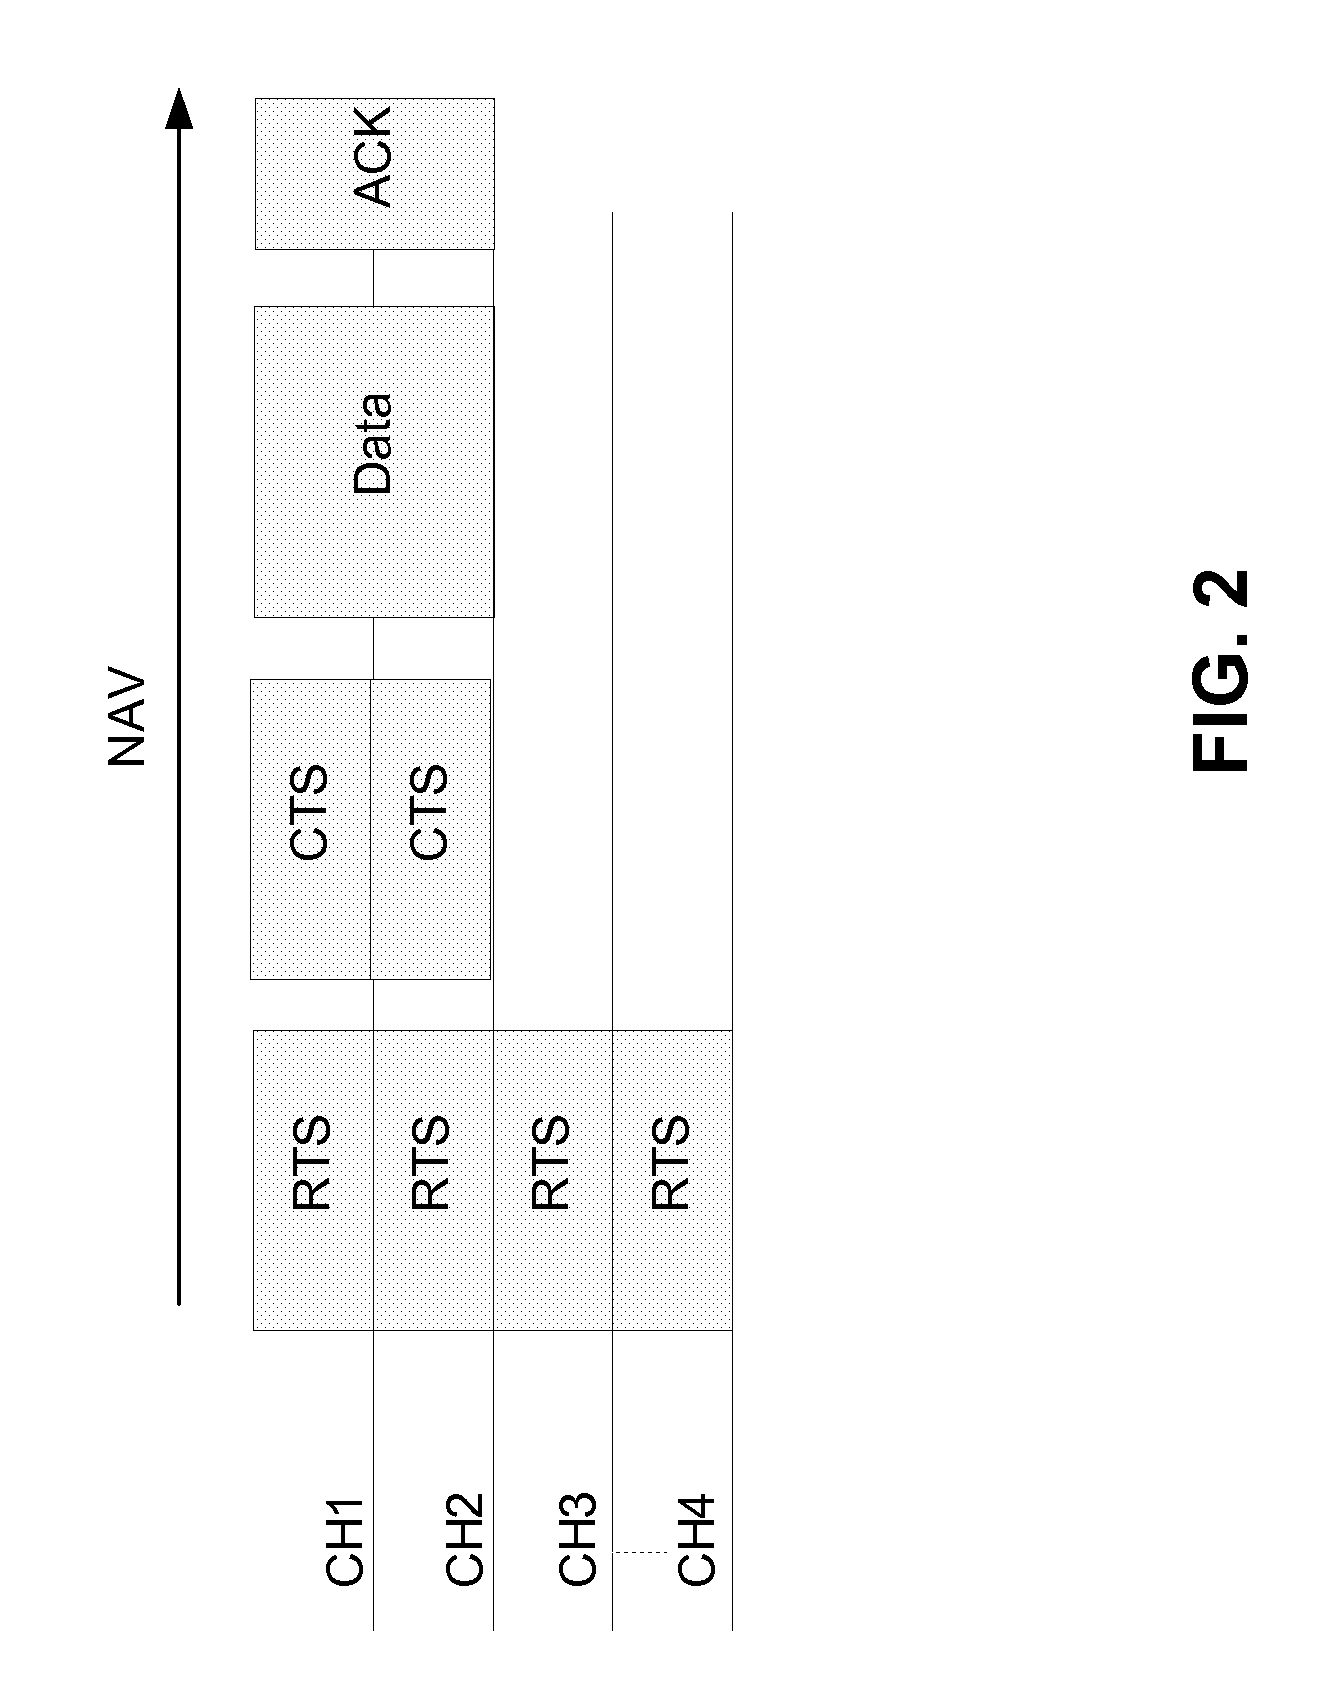 Apparatus and method for transmission and recovery modes for an rts/cts system that utilizes multichannels